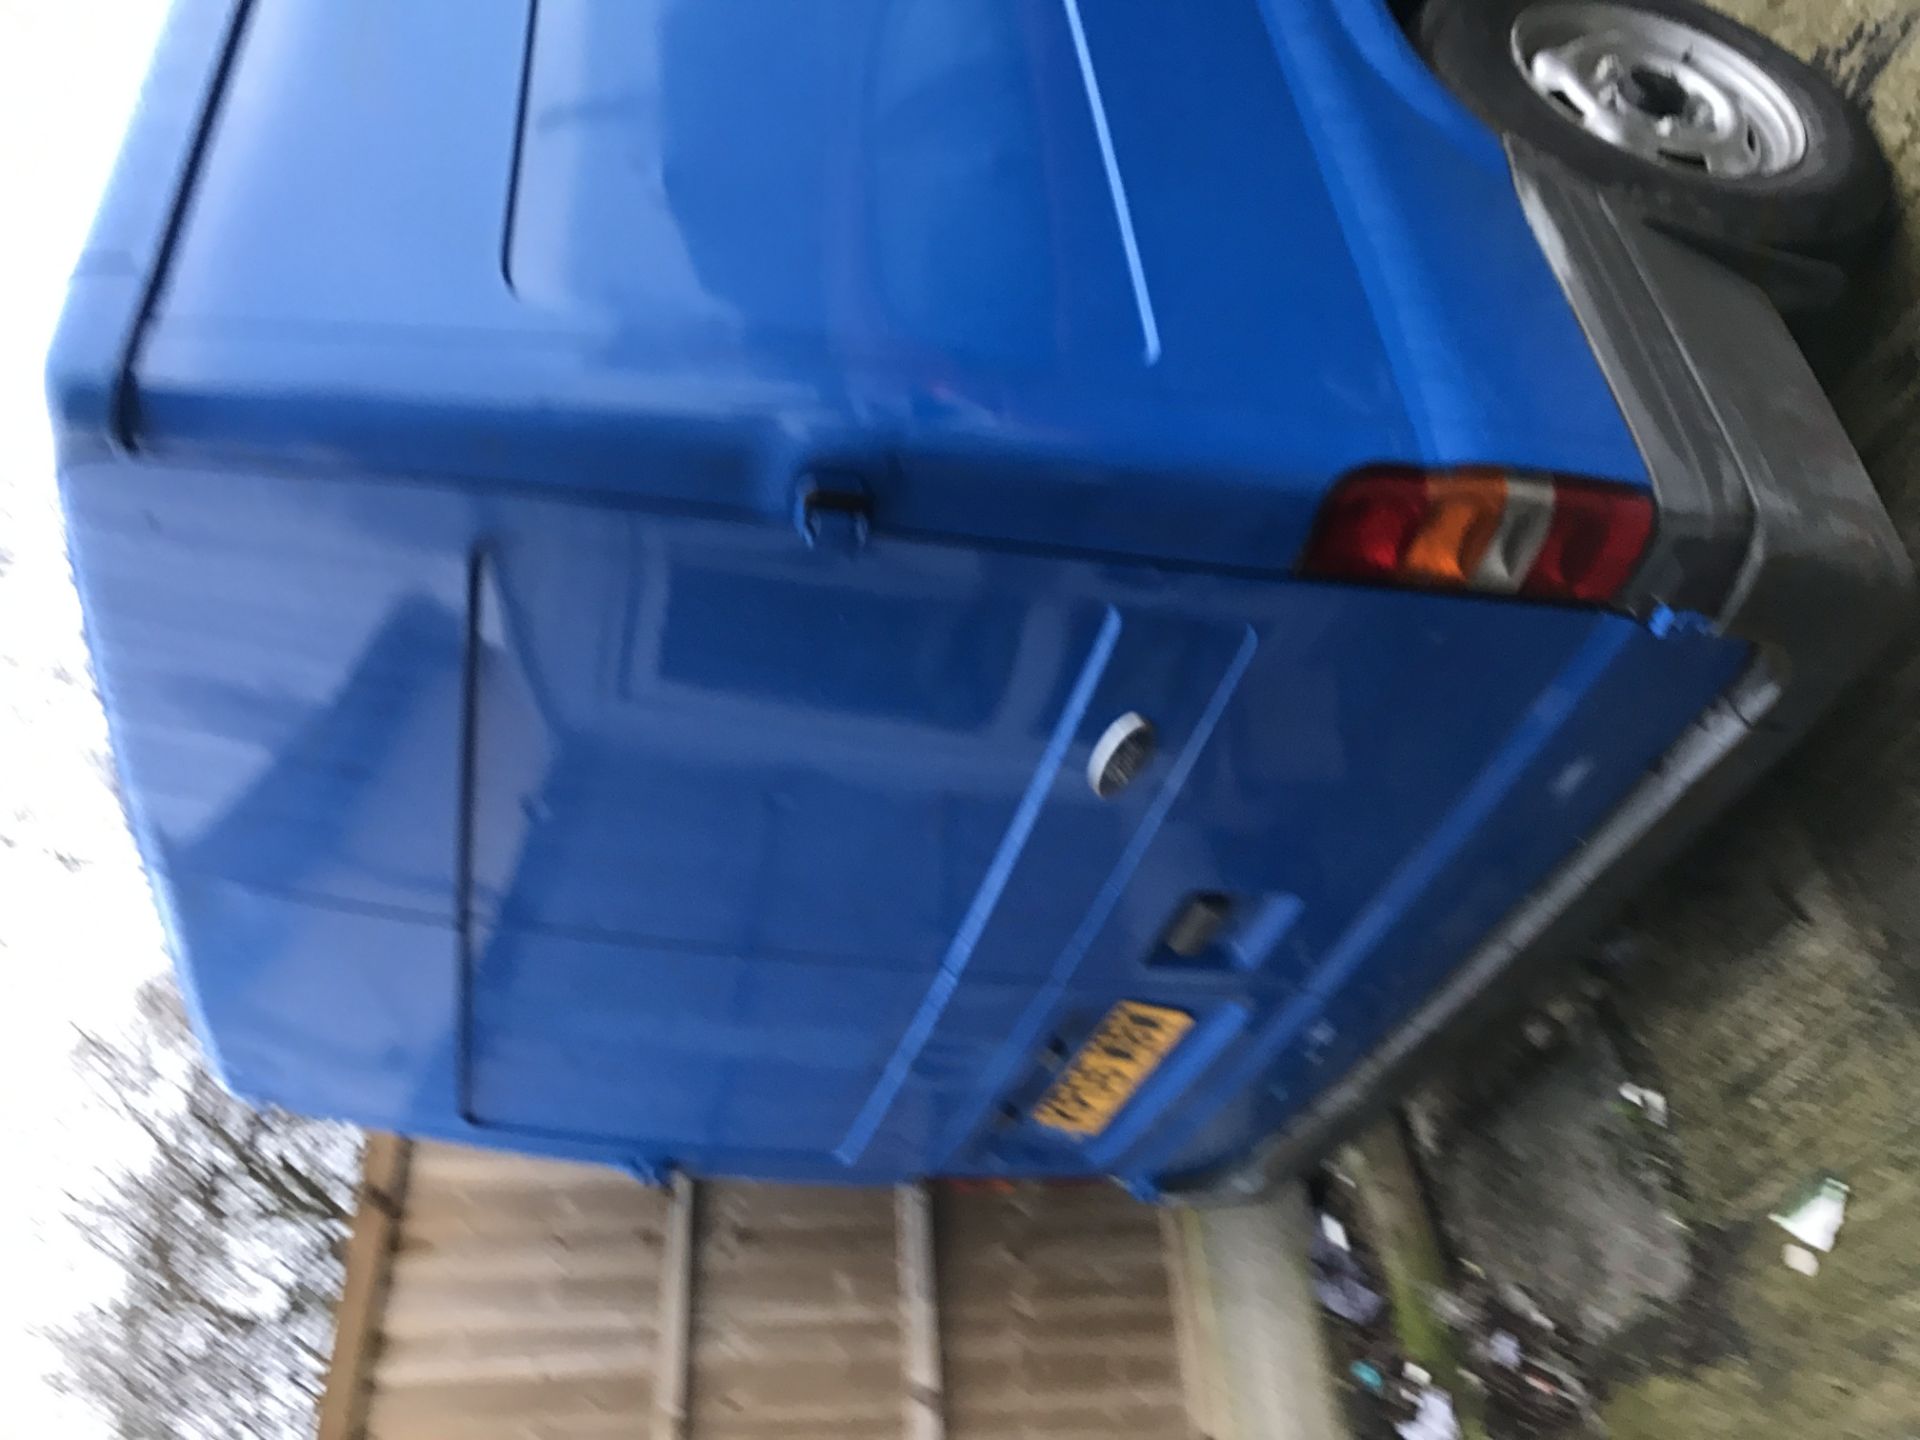 2006/06 REG FORD TRANSIT 280 LWB - RECENTLY HAD A FULL RE-SPRAY *NO VAT* - Image 10 of 17